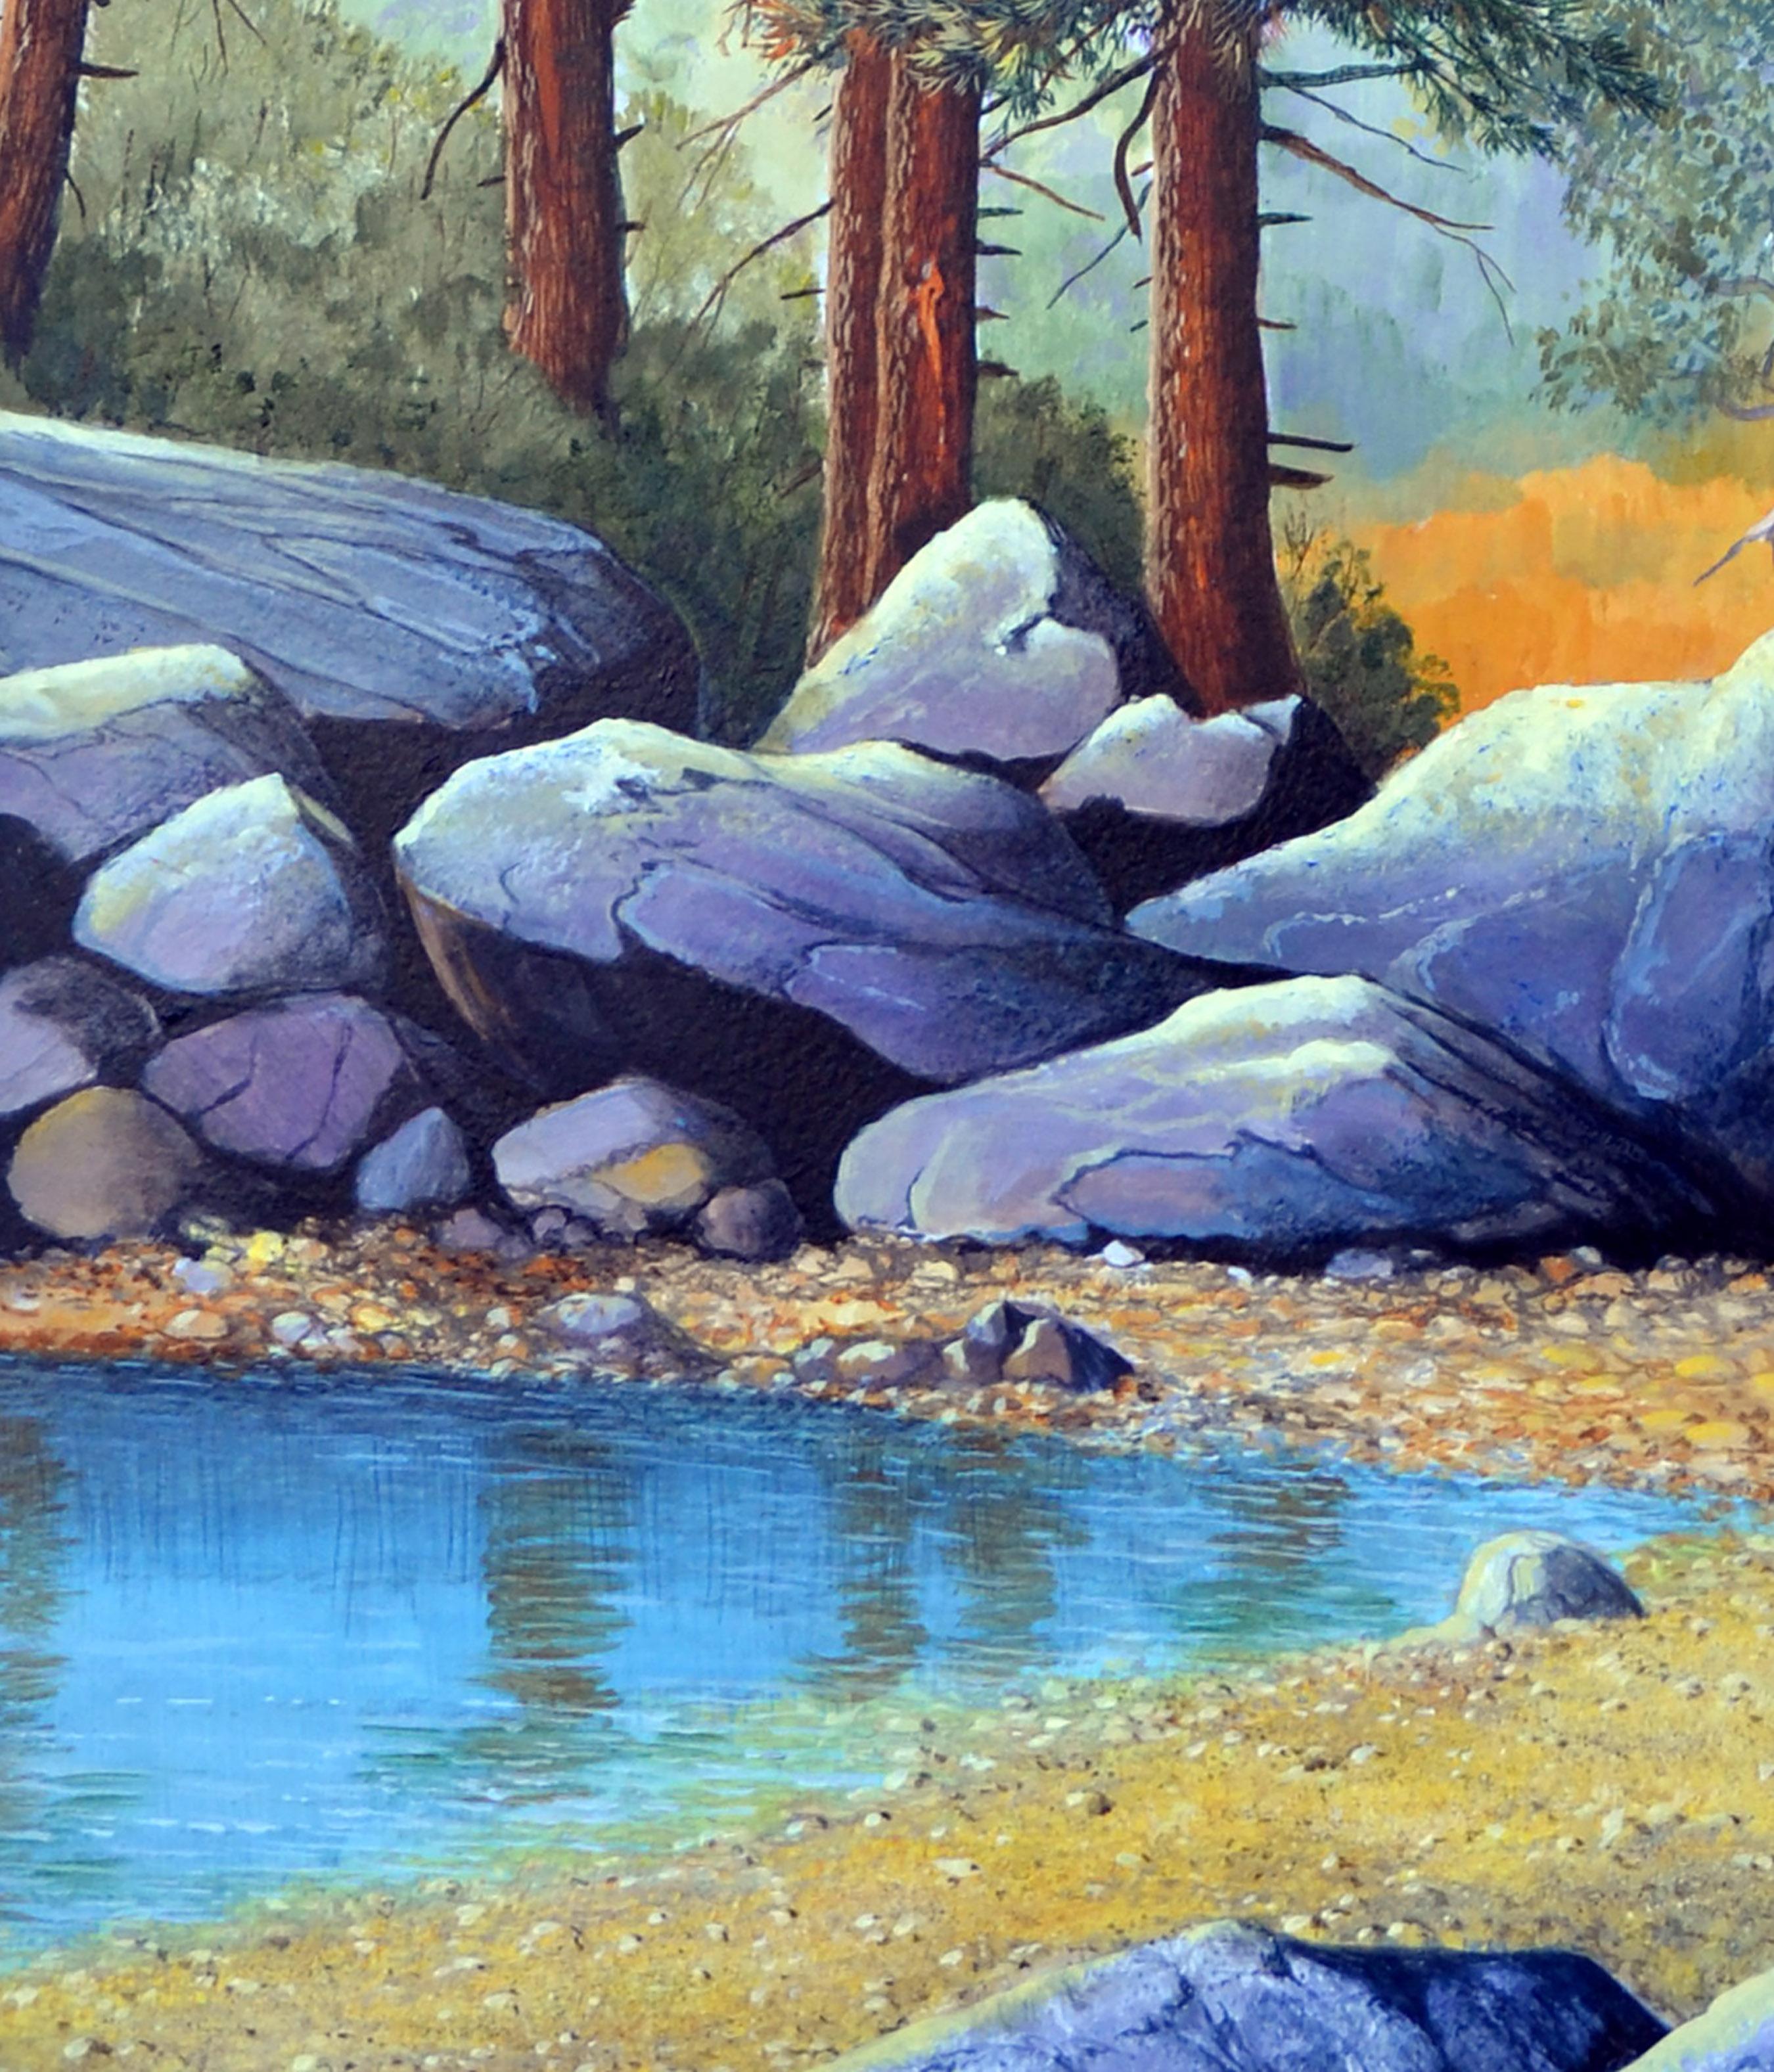 Stunning California landscape of a small reflective pond with tall trees, big boulders, and ducks rendered in crisp detail by Luke Stamos (American, 20th century). Signed 